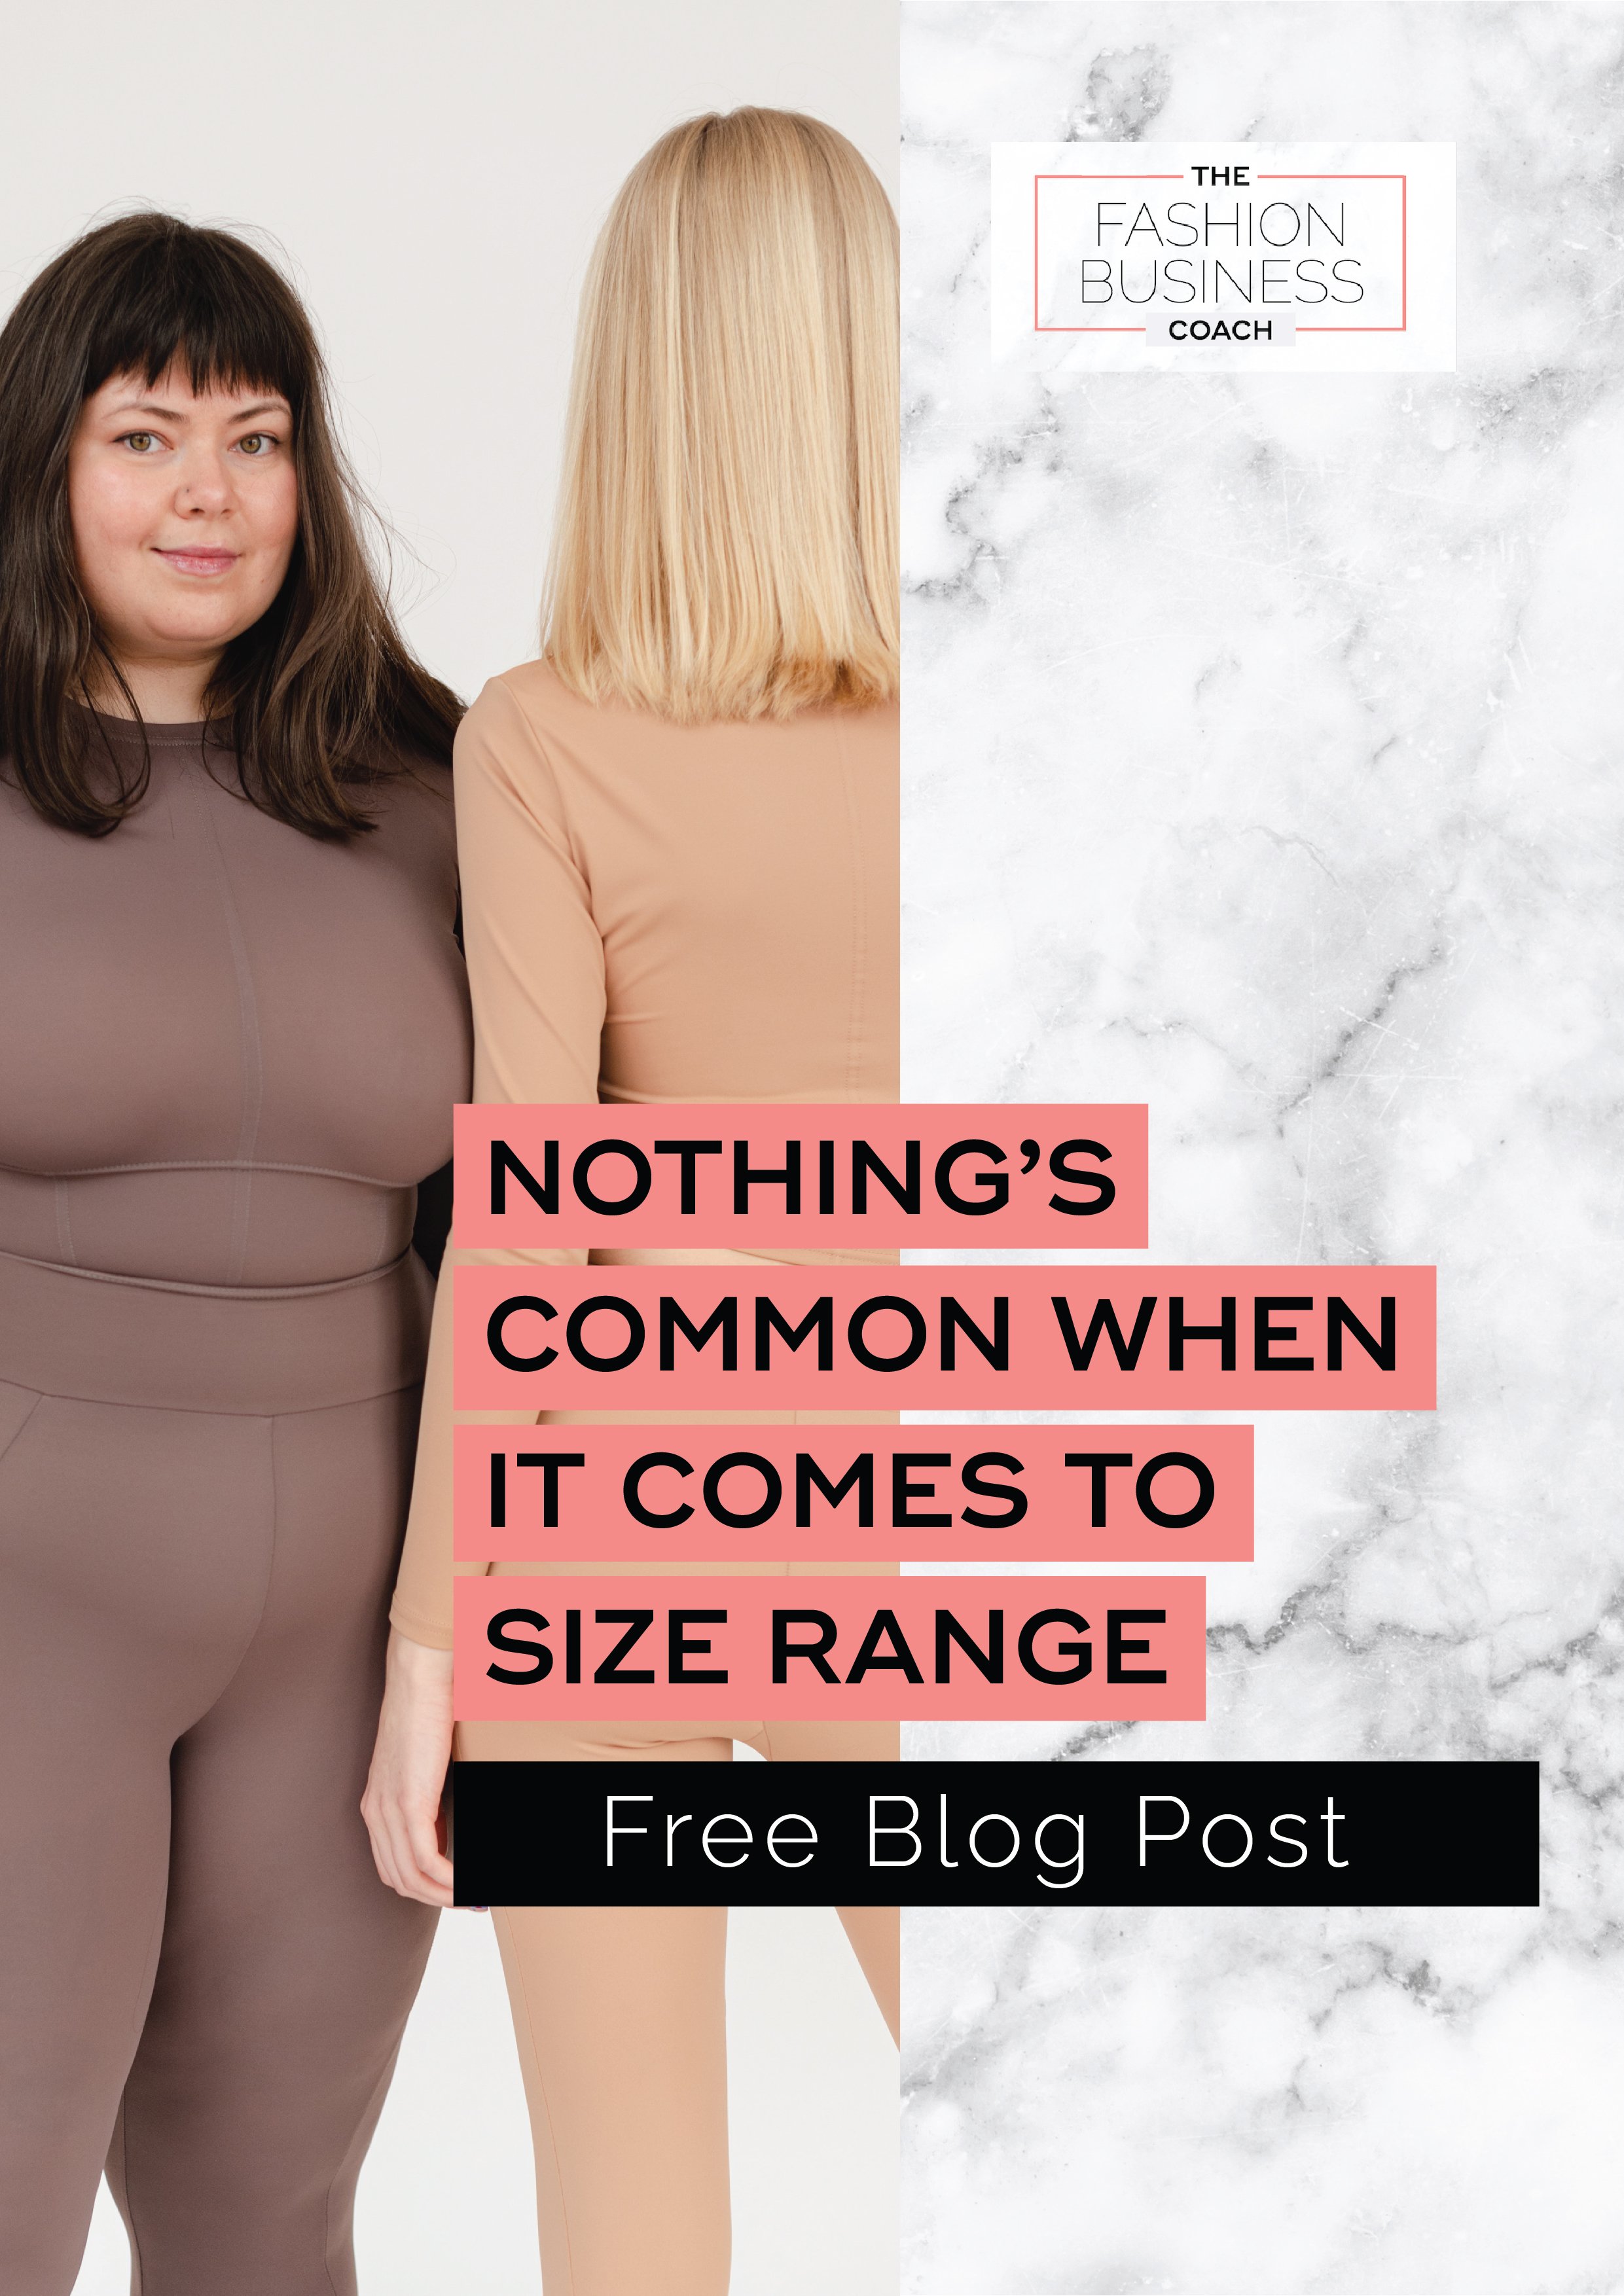 Nothings common when it comes to size range 2.jpg